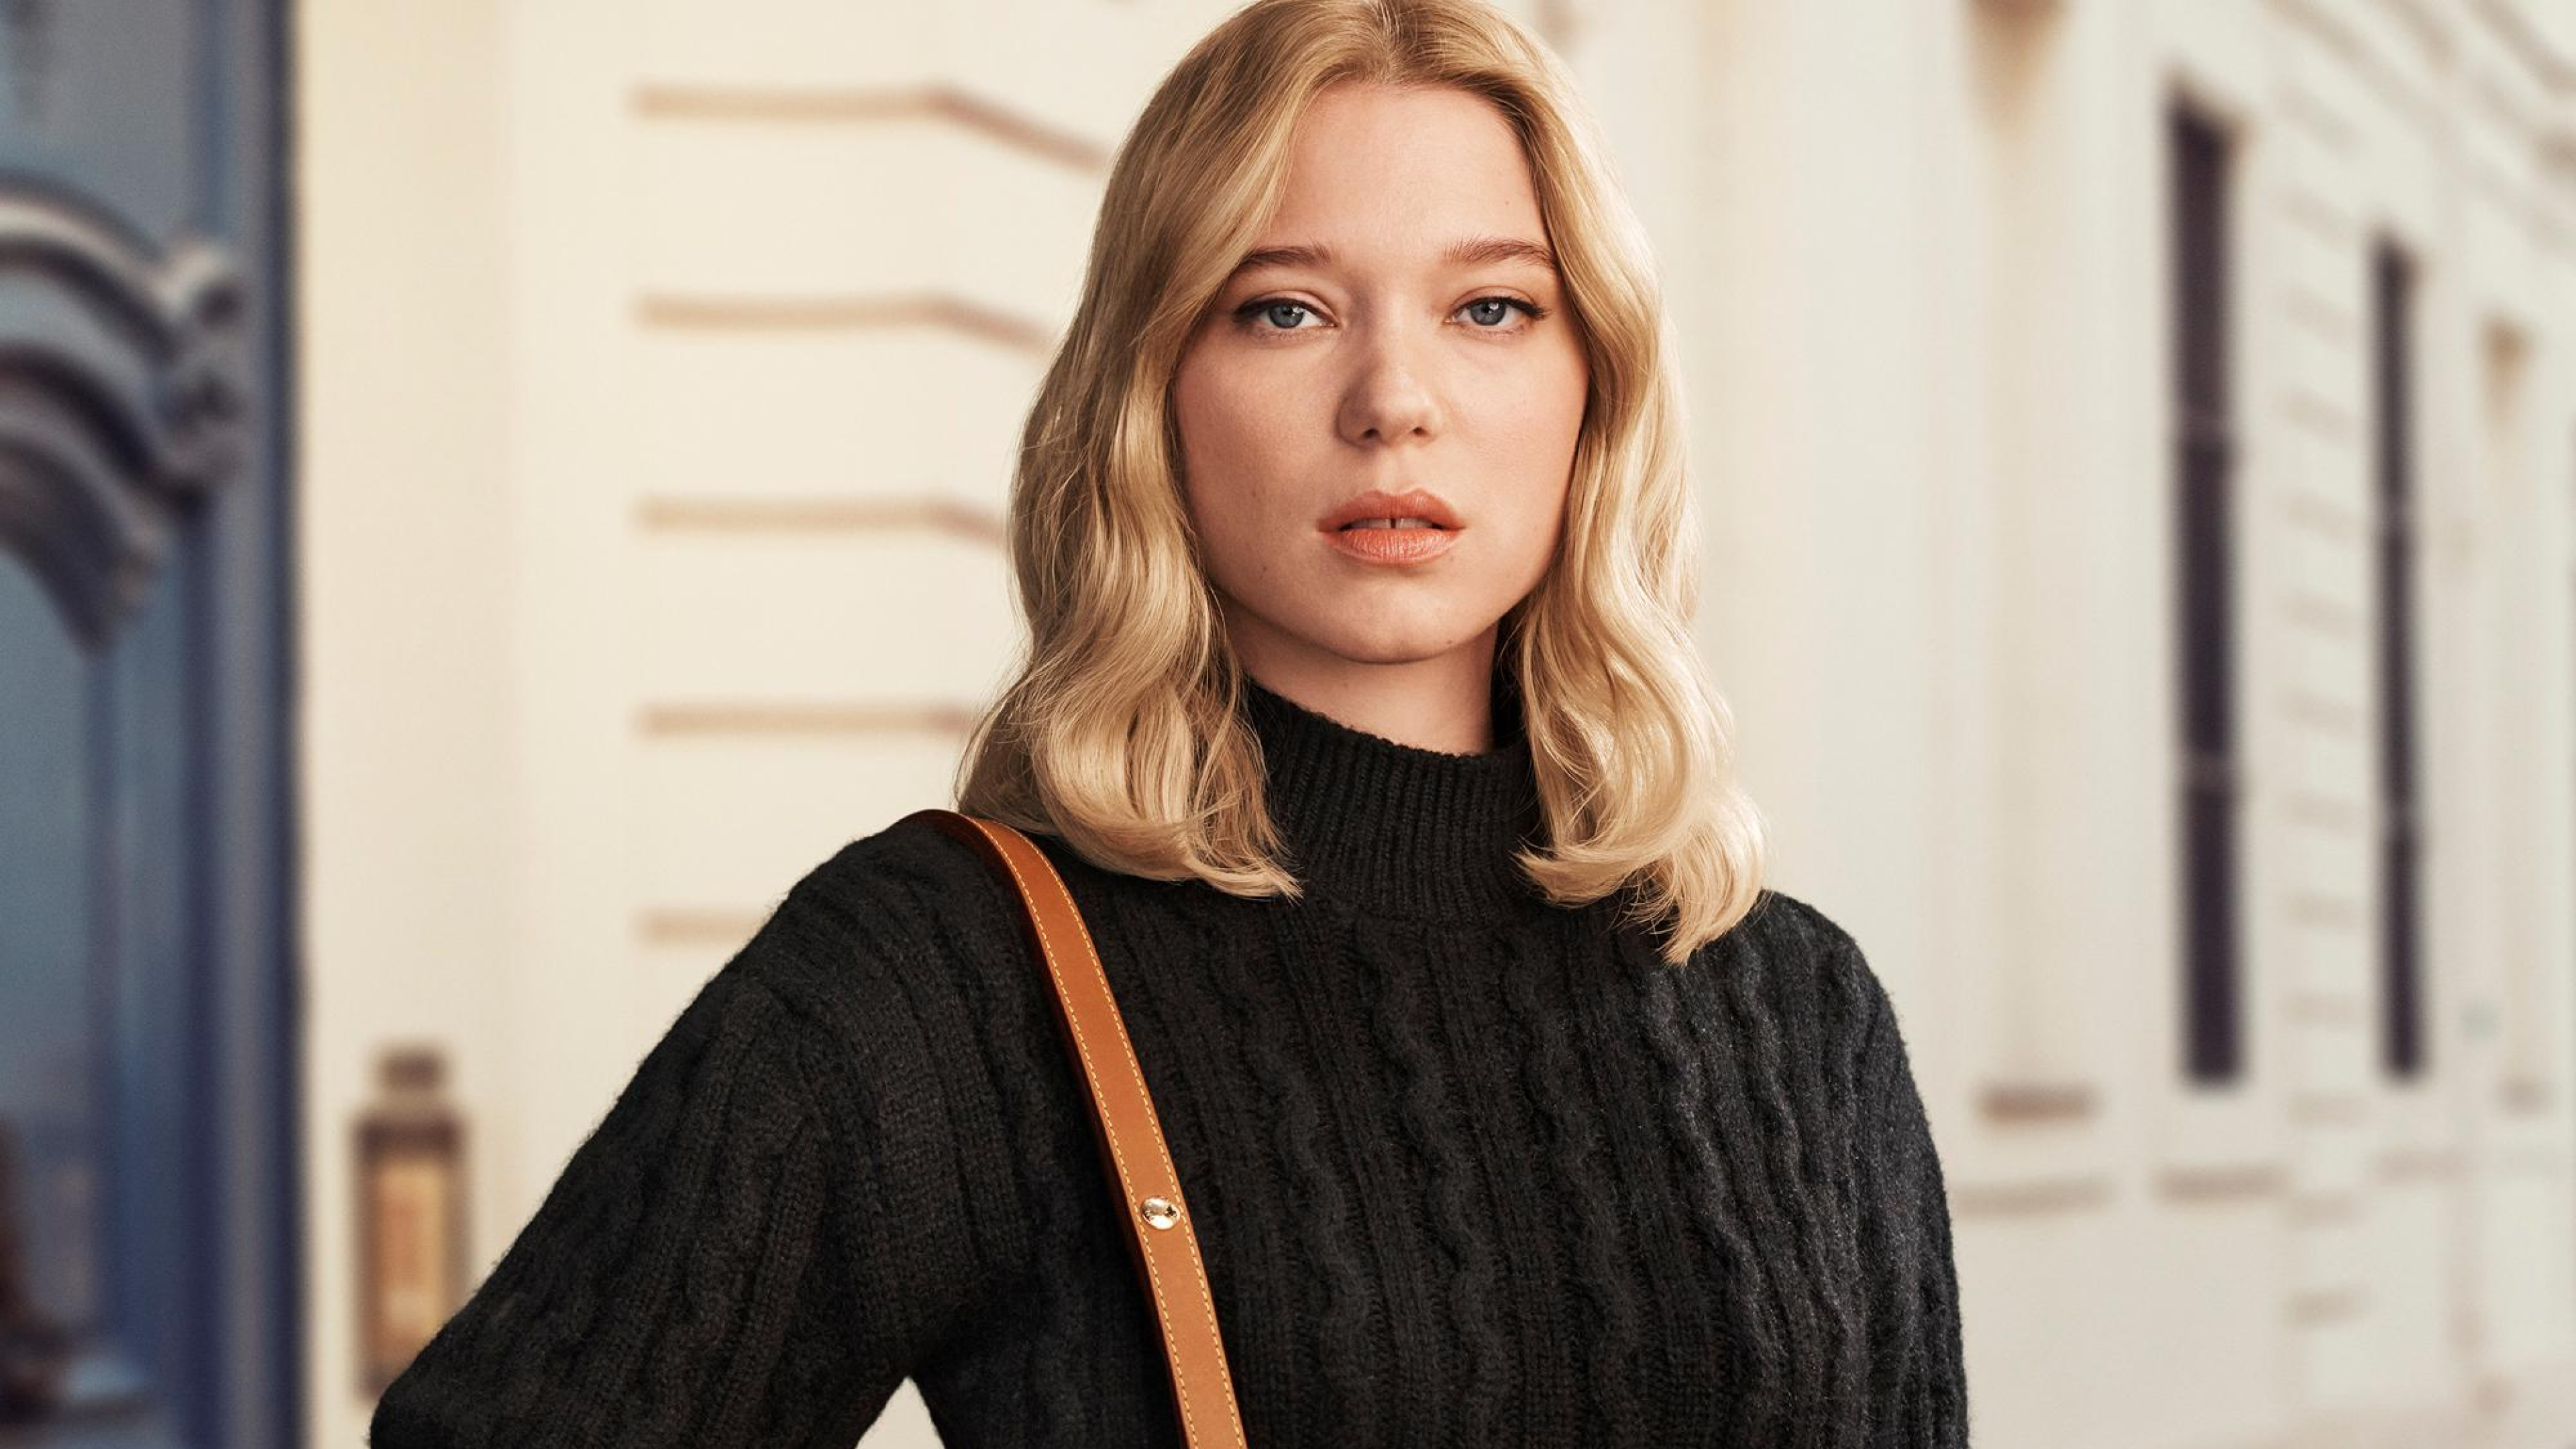 Lea Seydoux Wallpaper 4K, No Time to Die, 2020 Movies